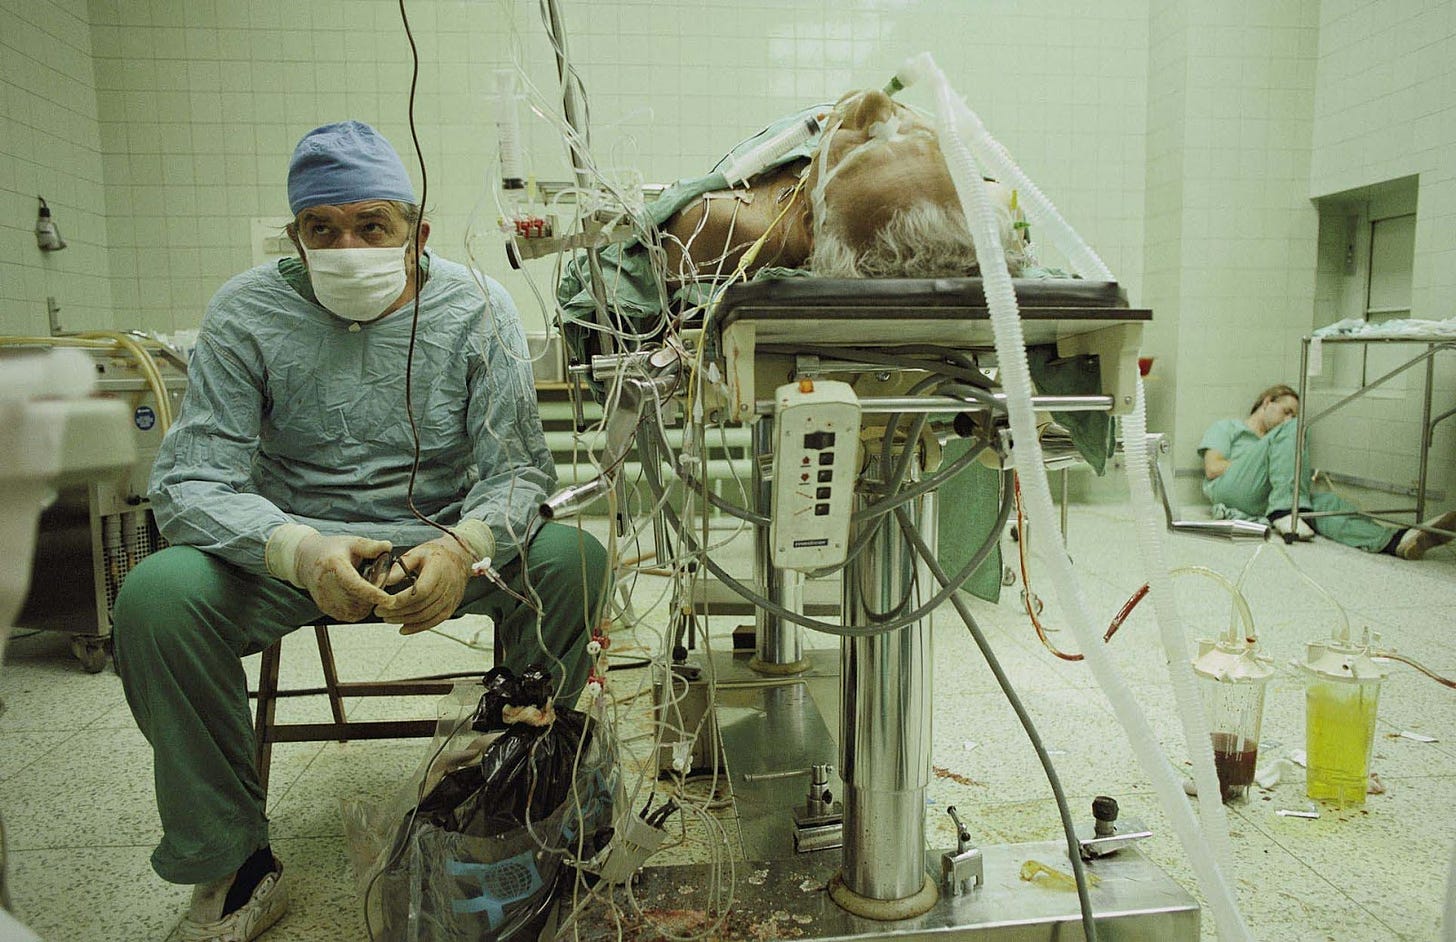 Dr. Zbigniew Religa monitors his patient’s vitals after a 23 hour long heart transplant surgery. His assistant is asleep in the corner.